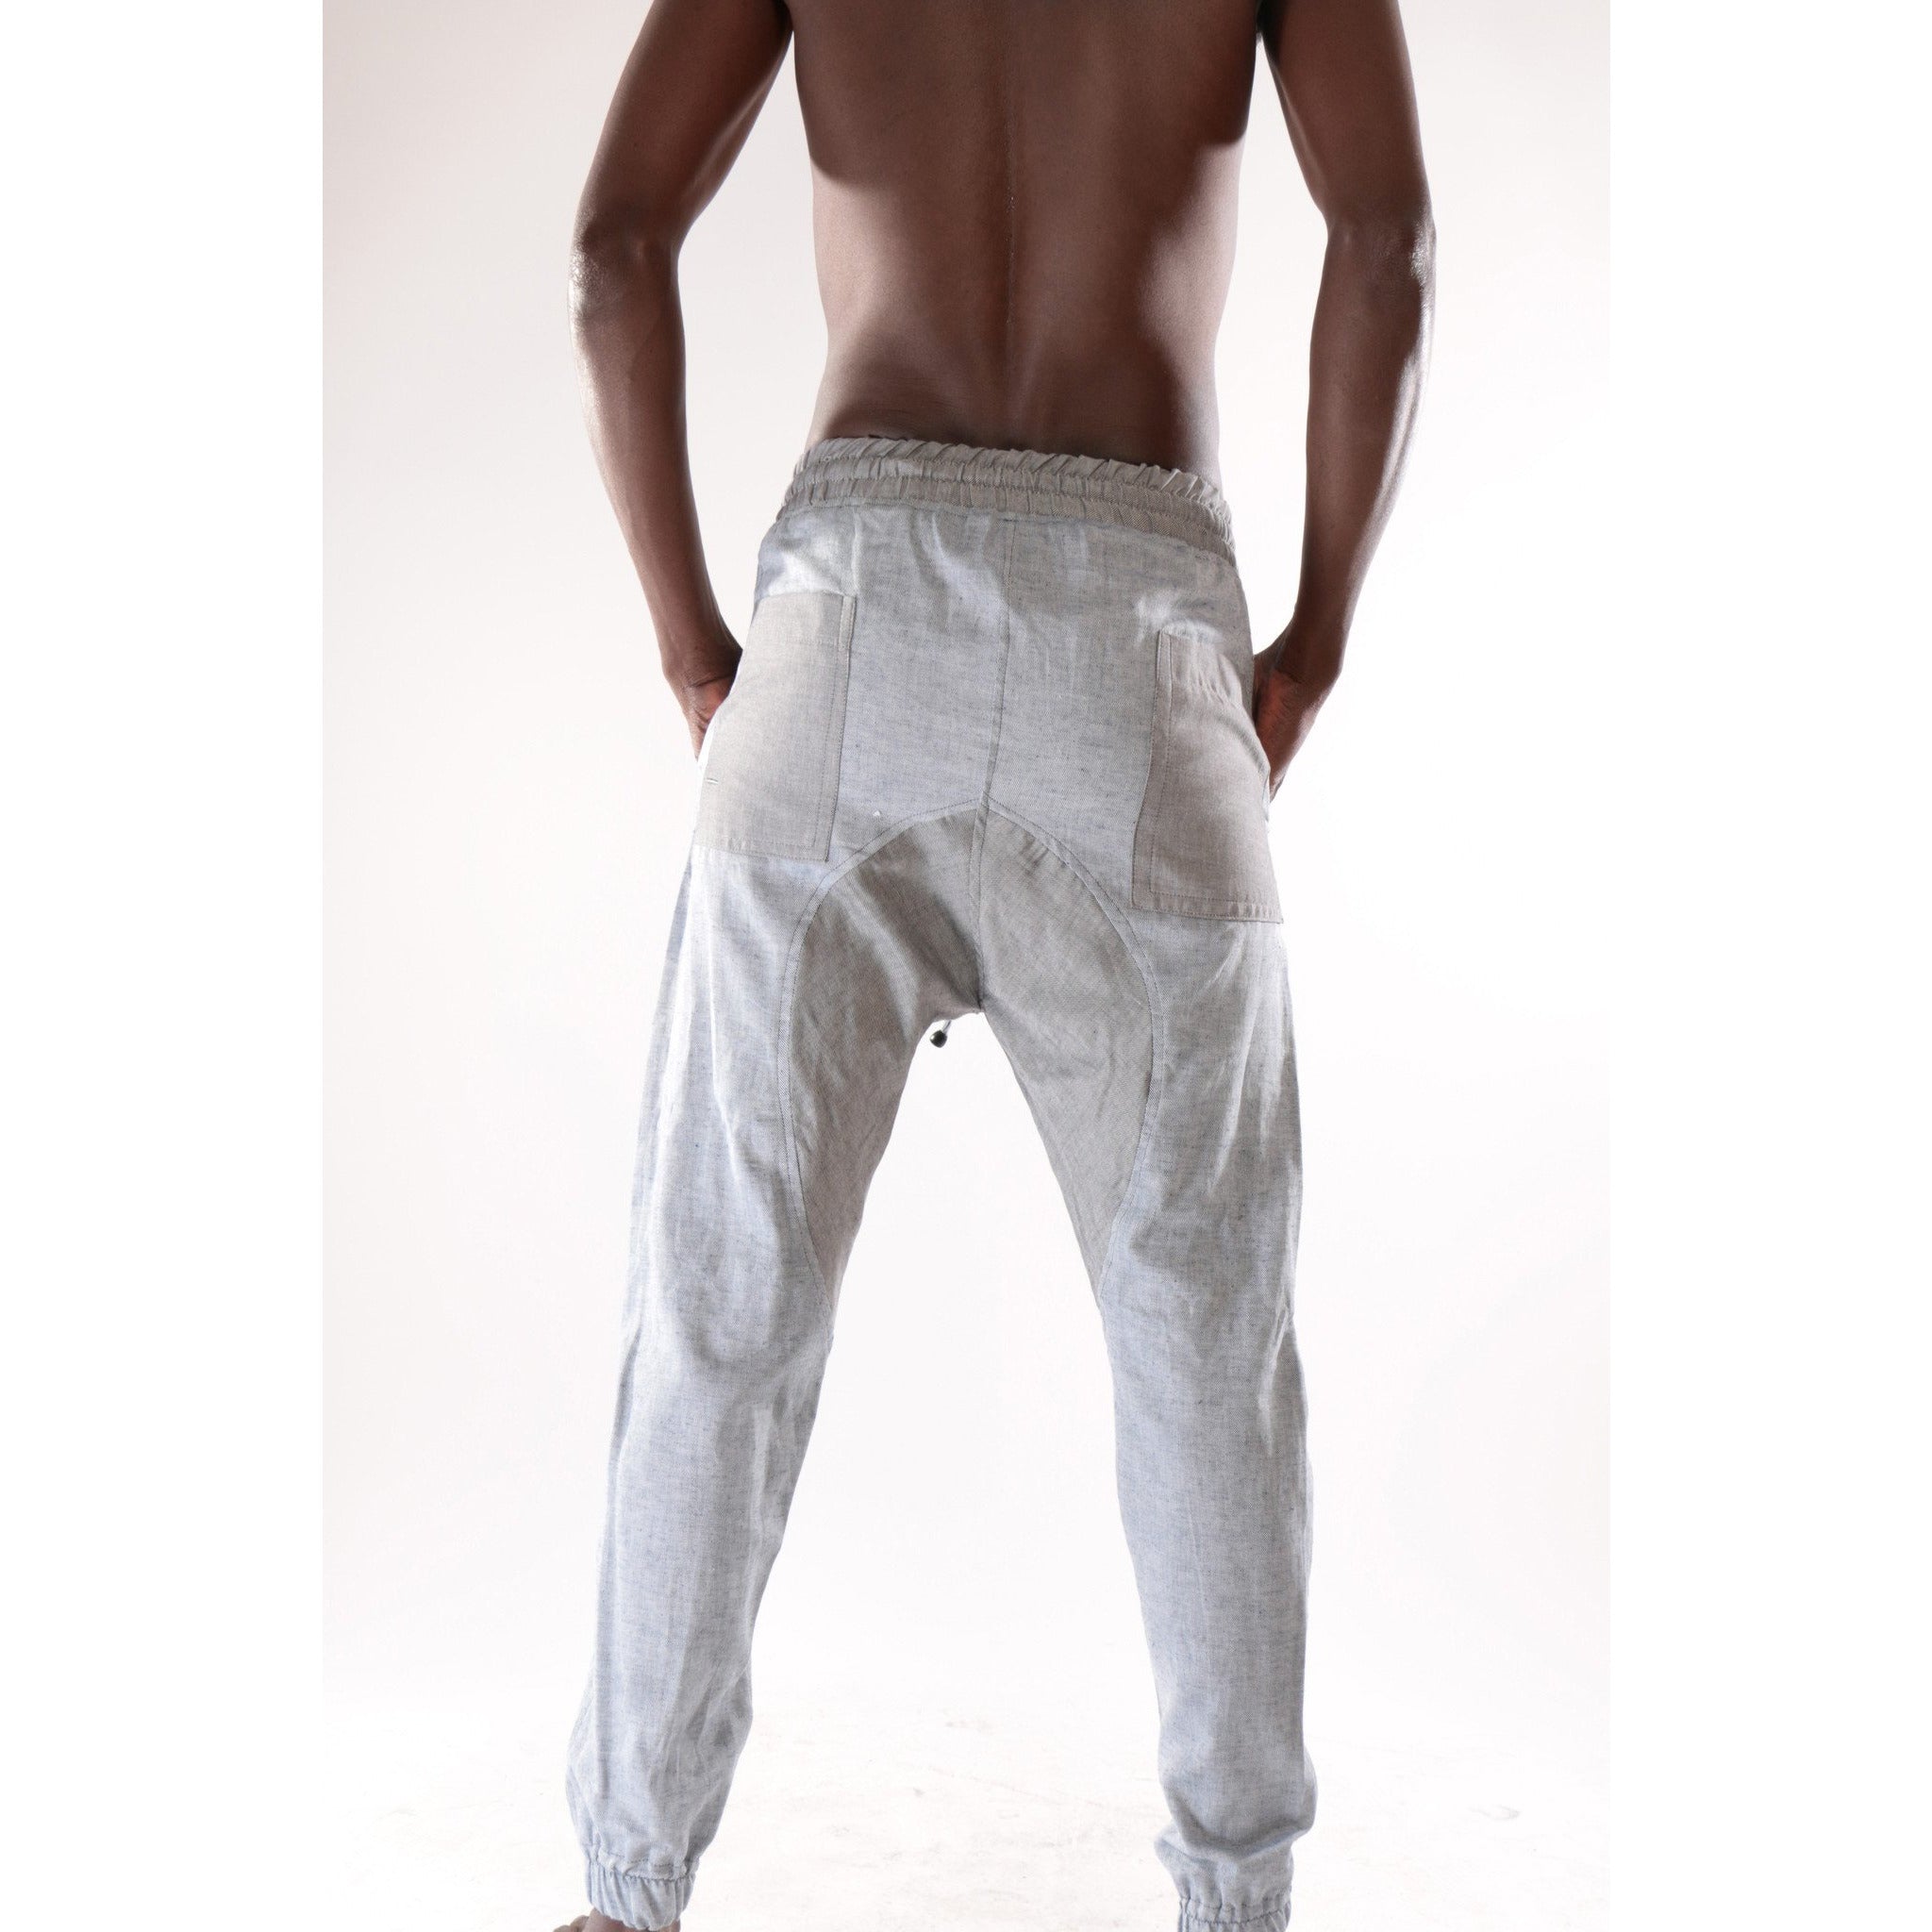 Classic fashion harem pant with grey and sky blue pattern